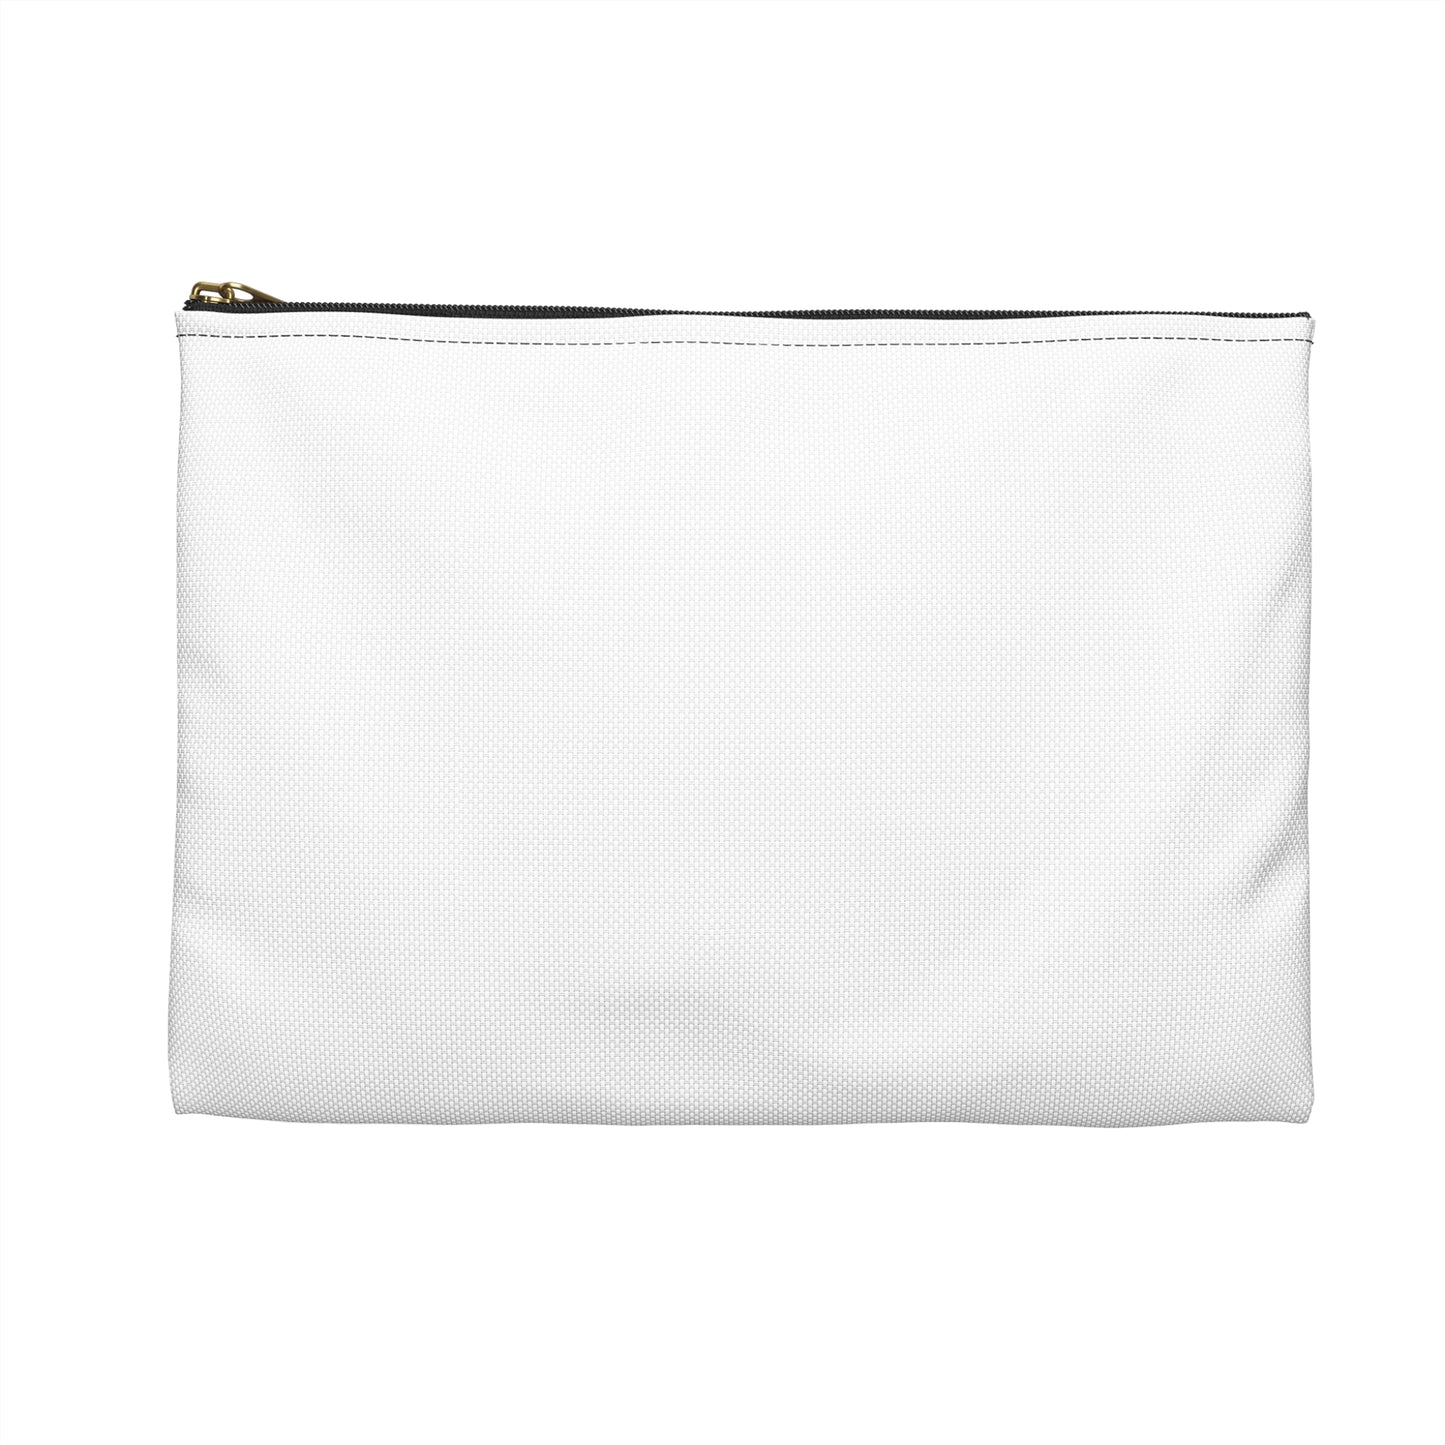 Heather Slade Accessory Pouch